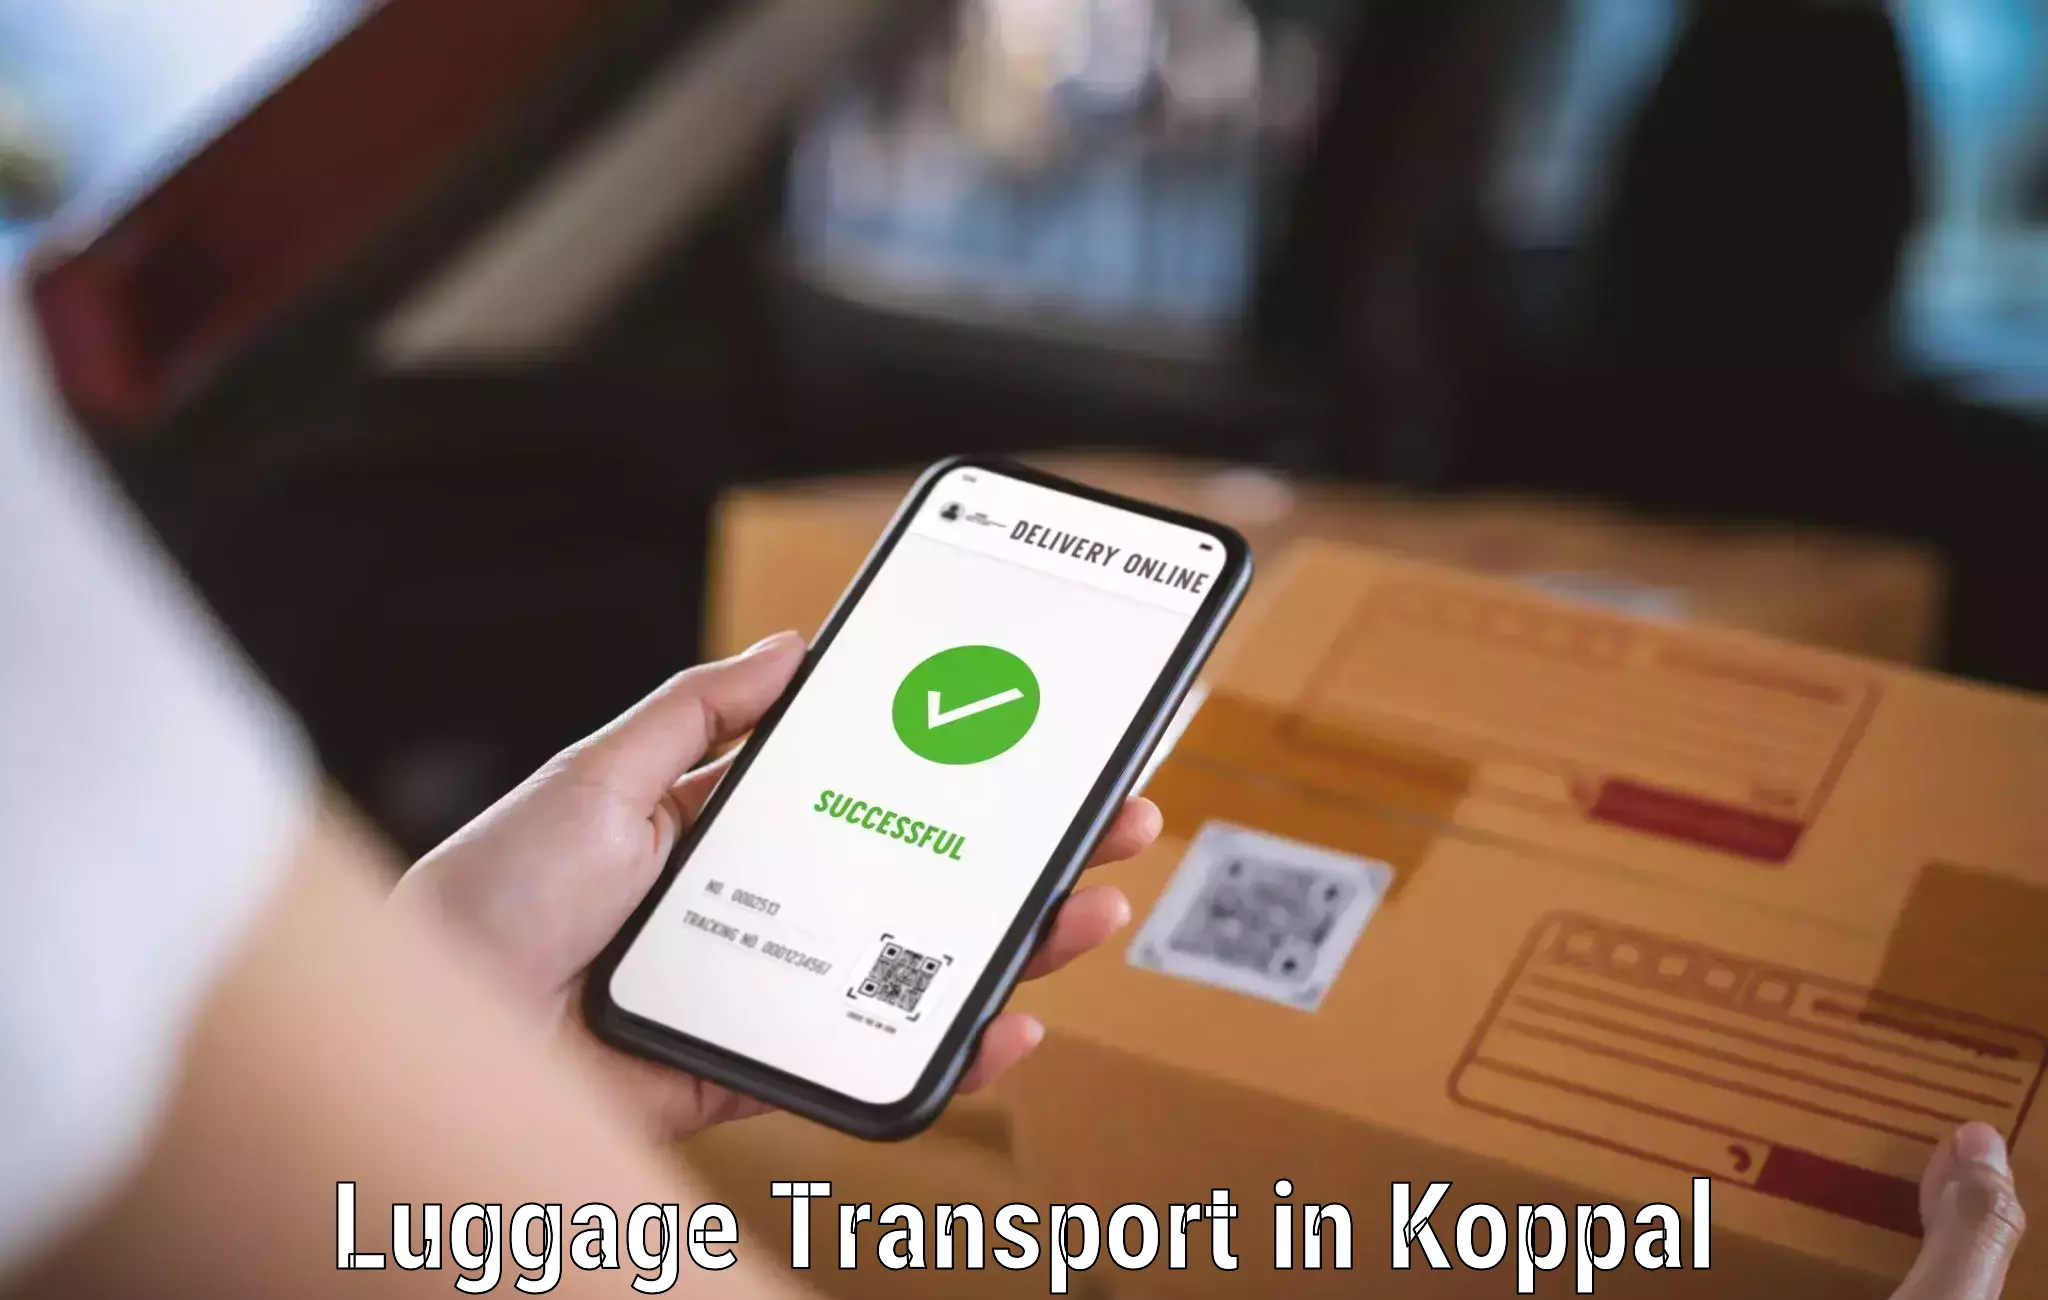 Luggage shipping consultation in Koppal